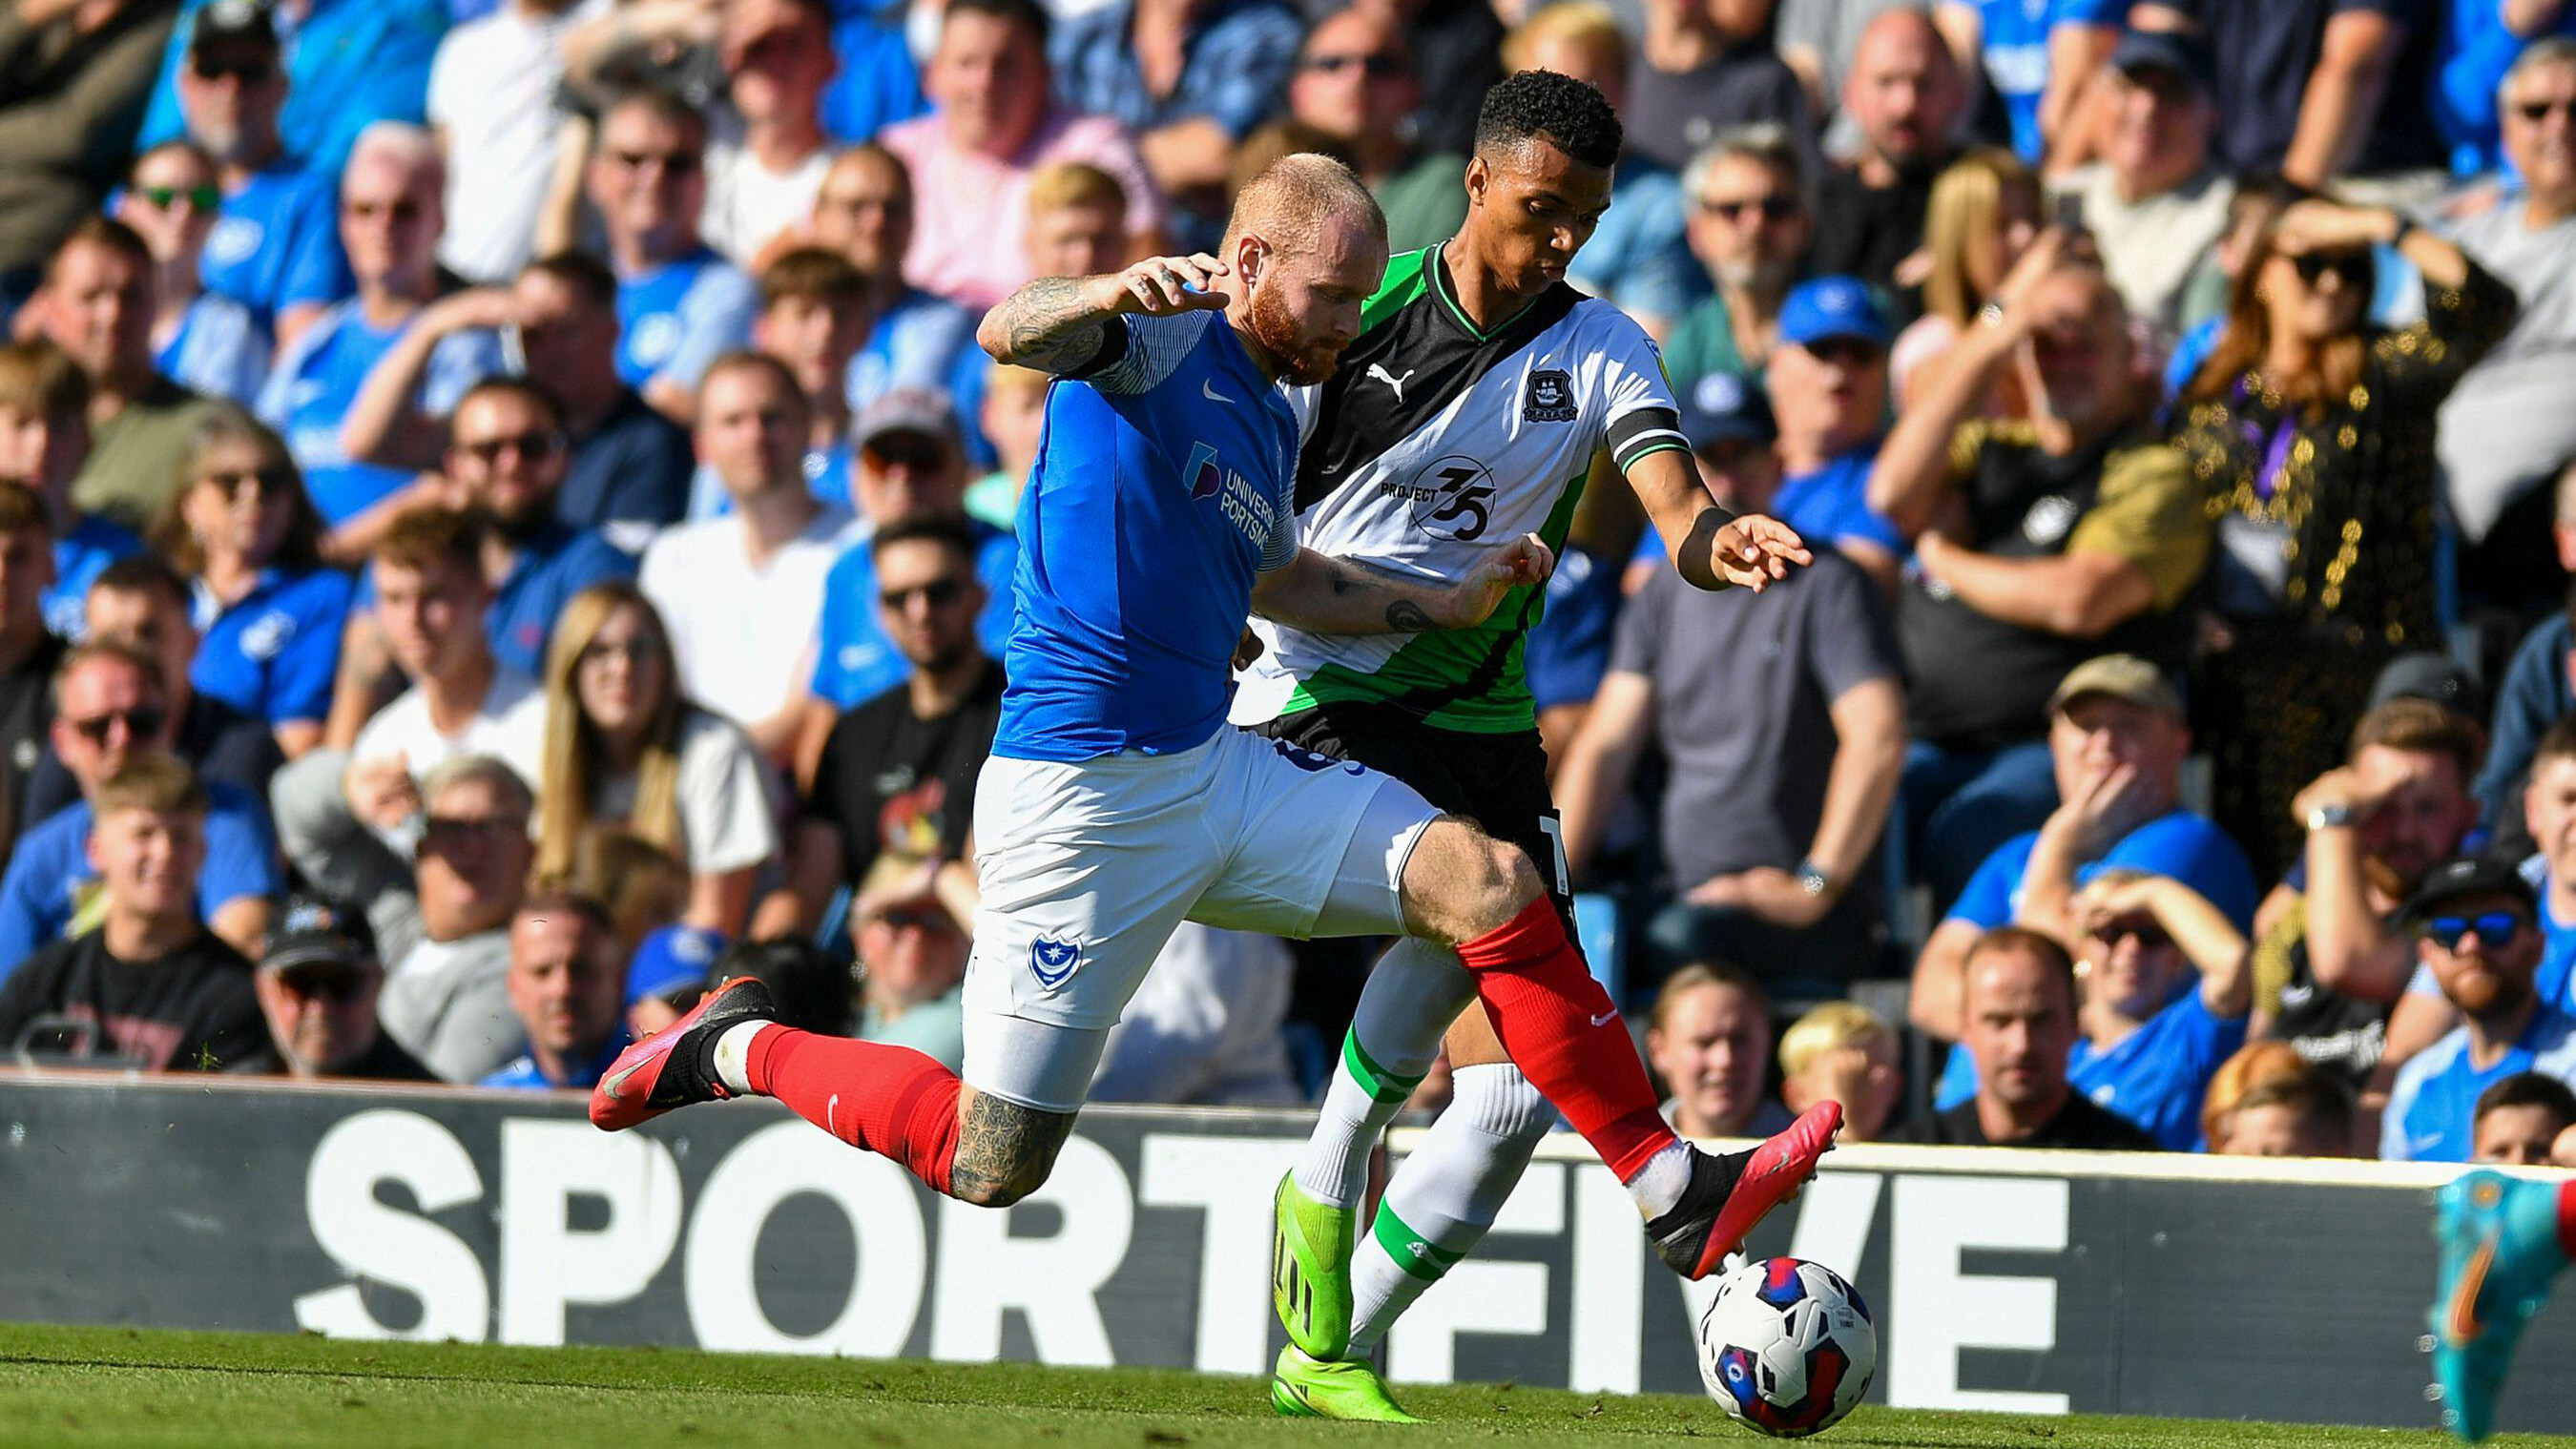 Morgan Whittaker challenging for the ball against Portsmouth